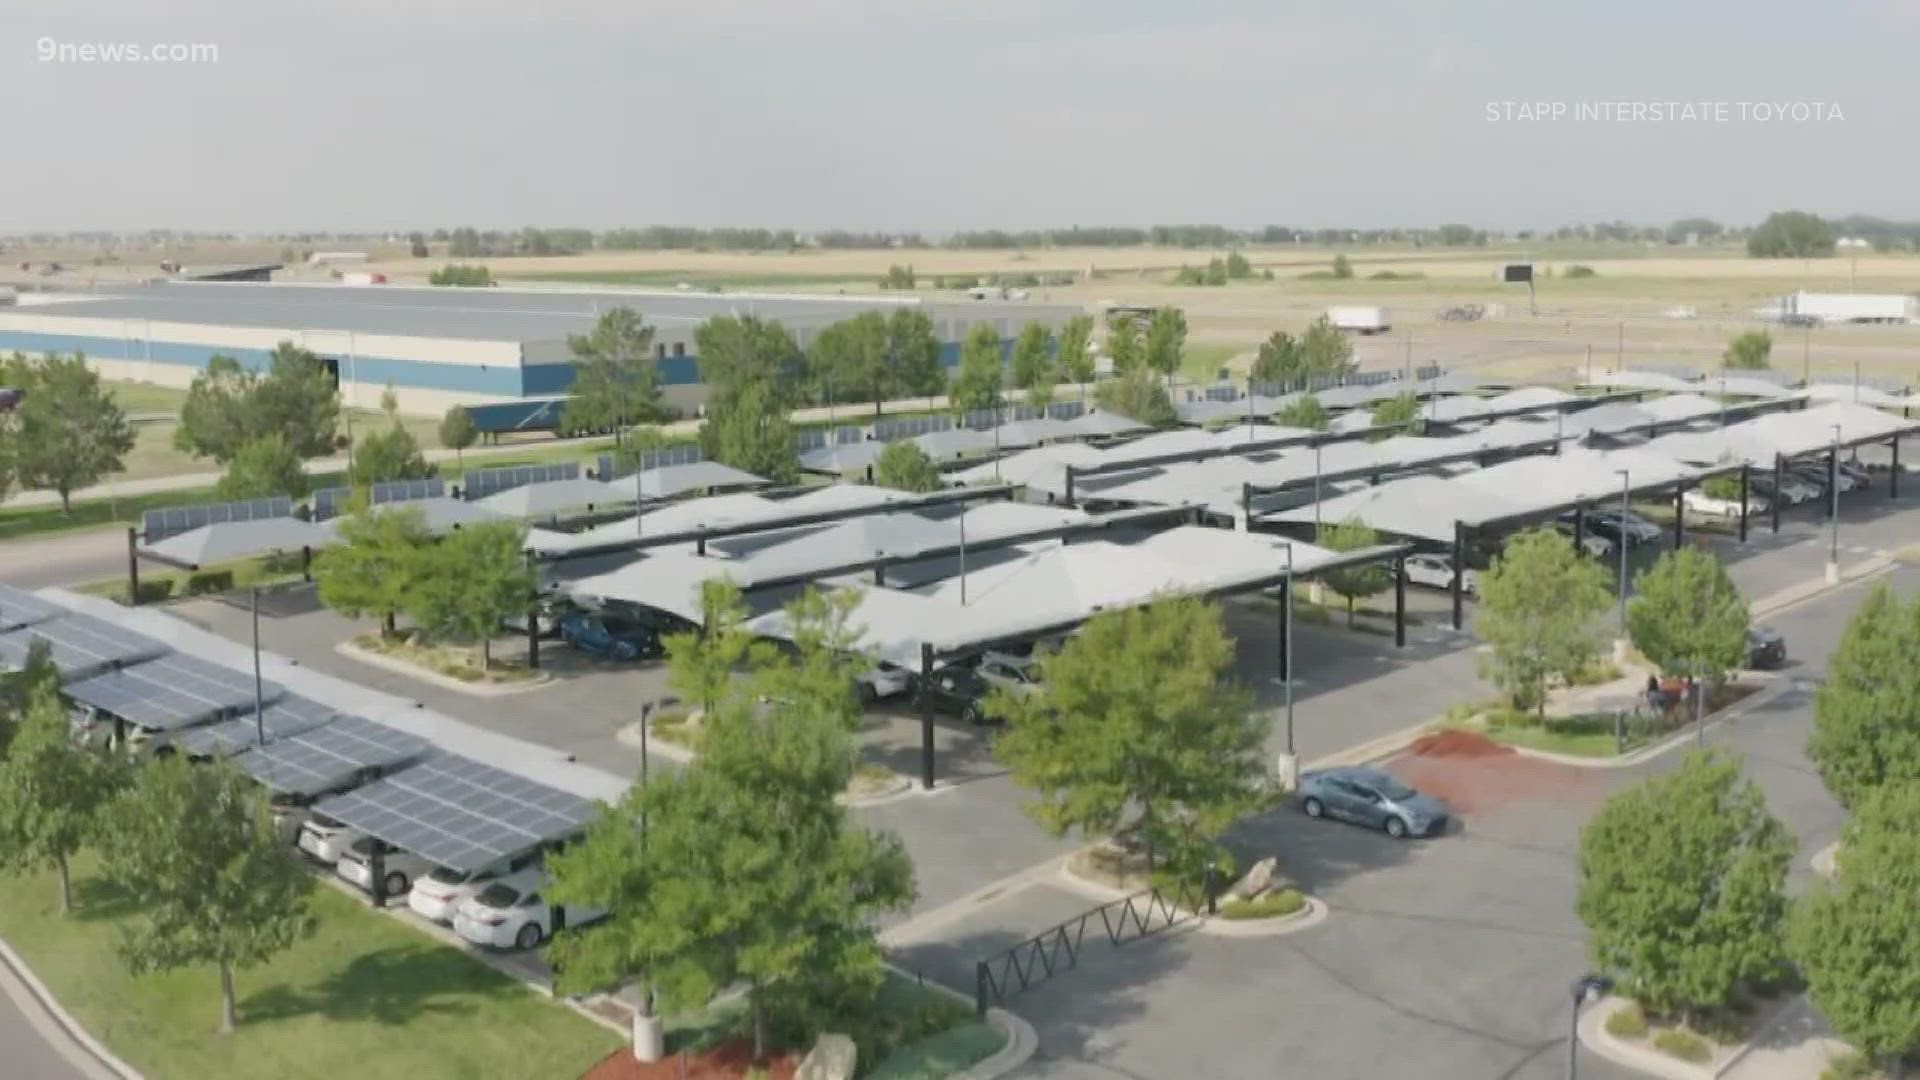 The dealership made changes after several hail storms in recent years damaged cars on the lot. Now their using solar powered car canopies to solve the problem.